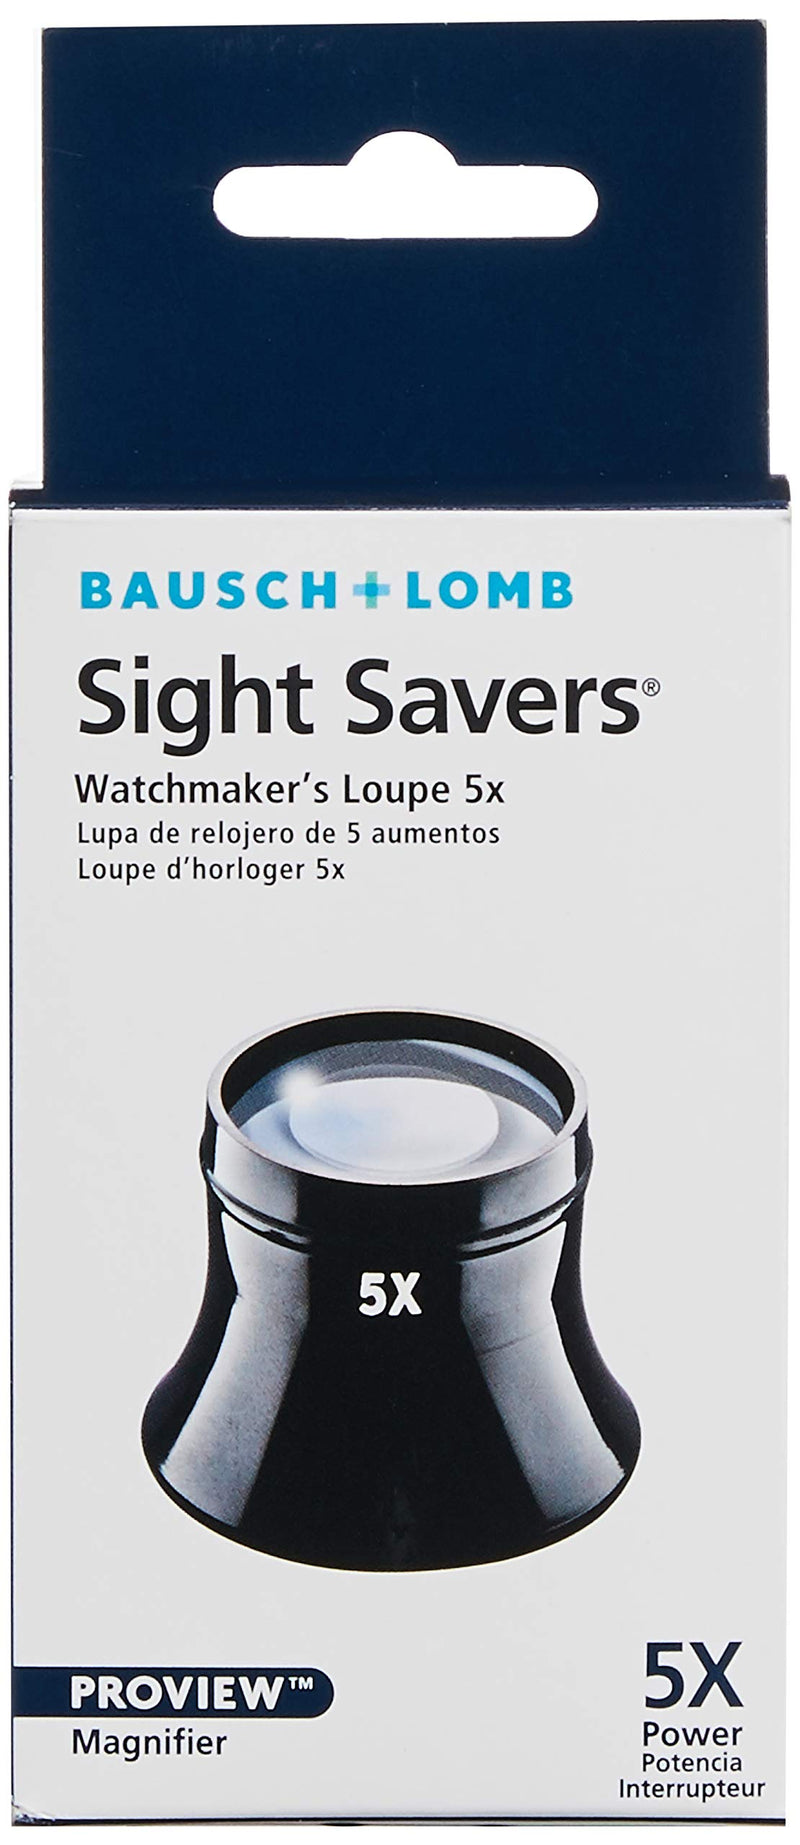 Loupe by Bausch & Lomb, 5x Watchmaker Loupe, Sight Savers, Black 1 Count (Pack of 1)